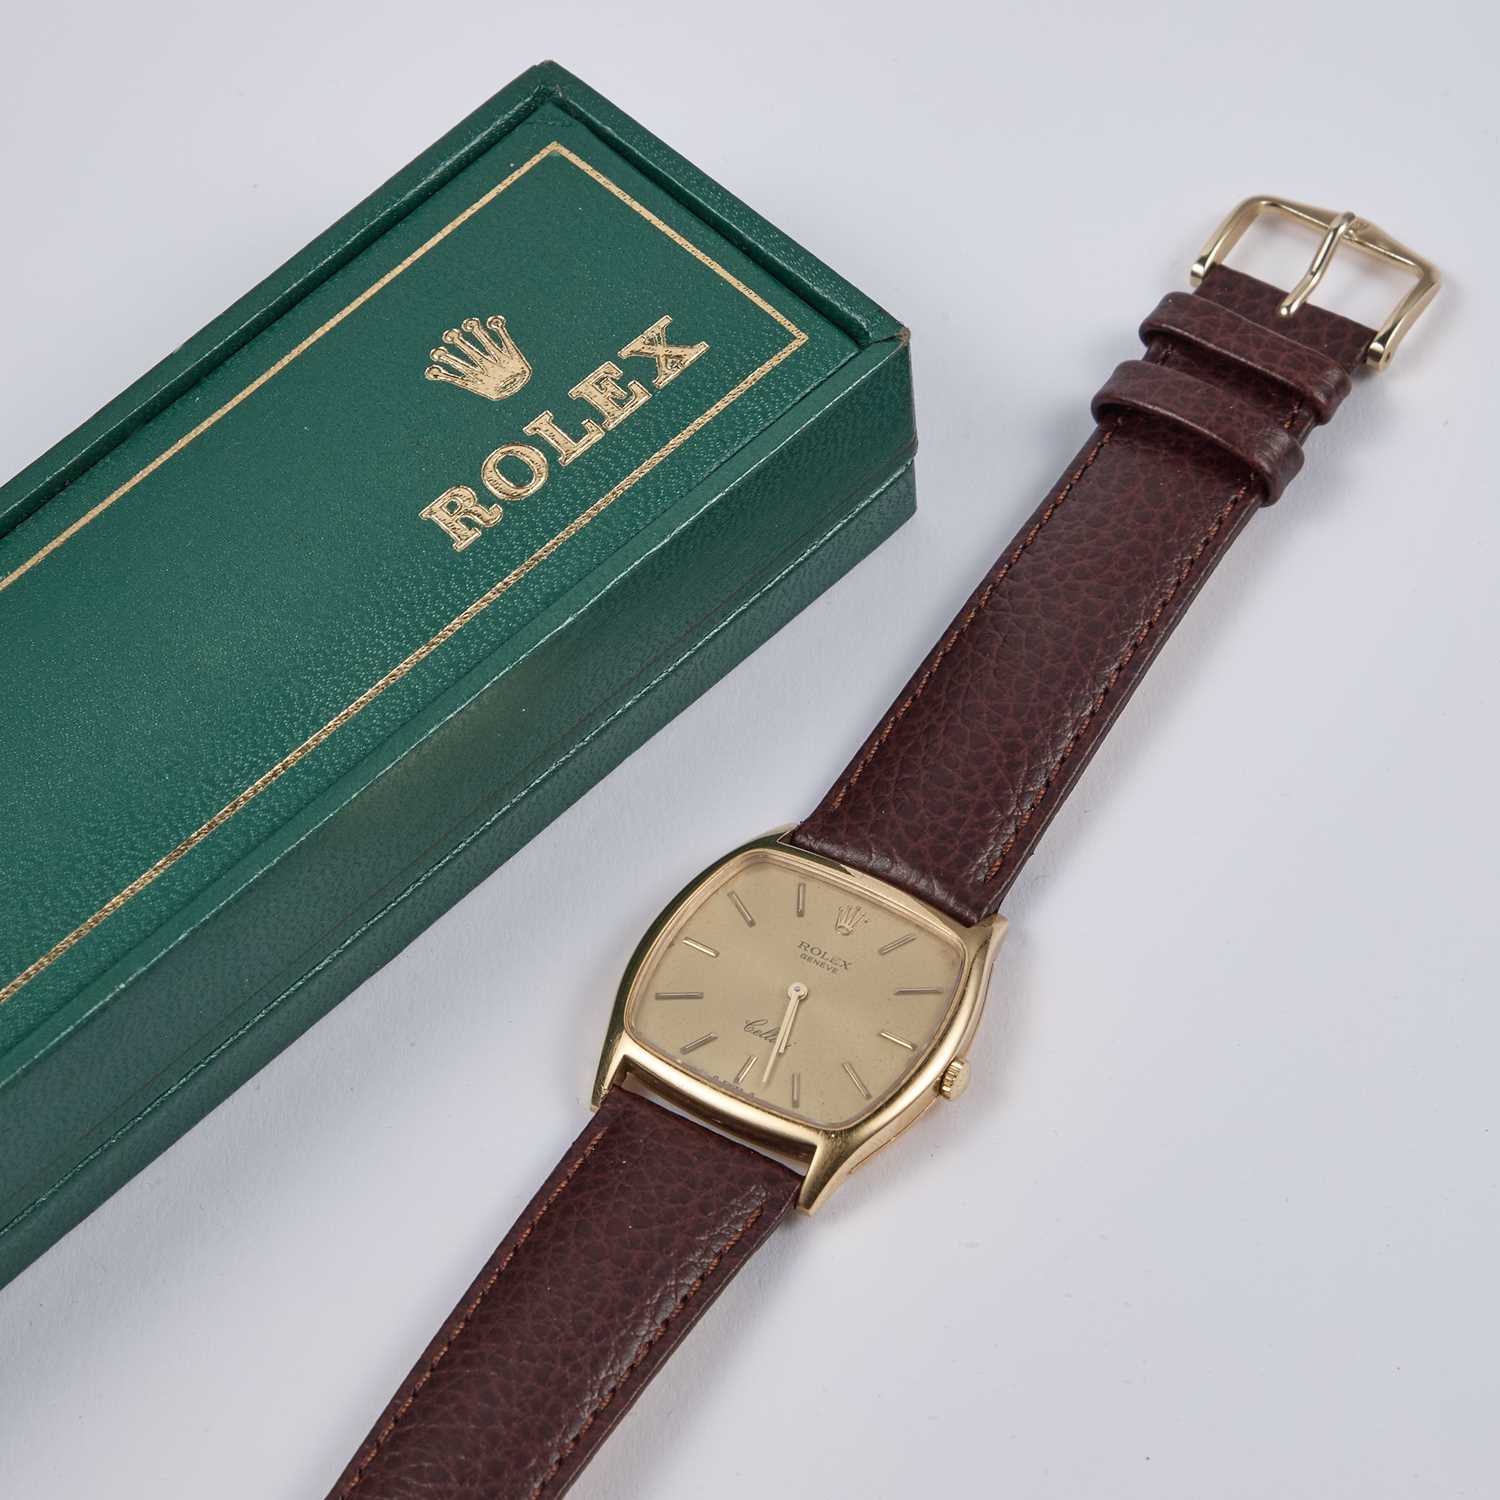 A GENTS 18CT GOLD ROLEX CELLINI STRAP WATCH - Image 3 of 3